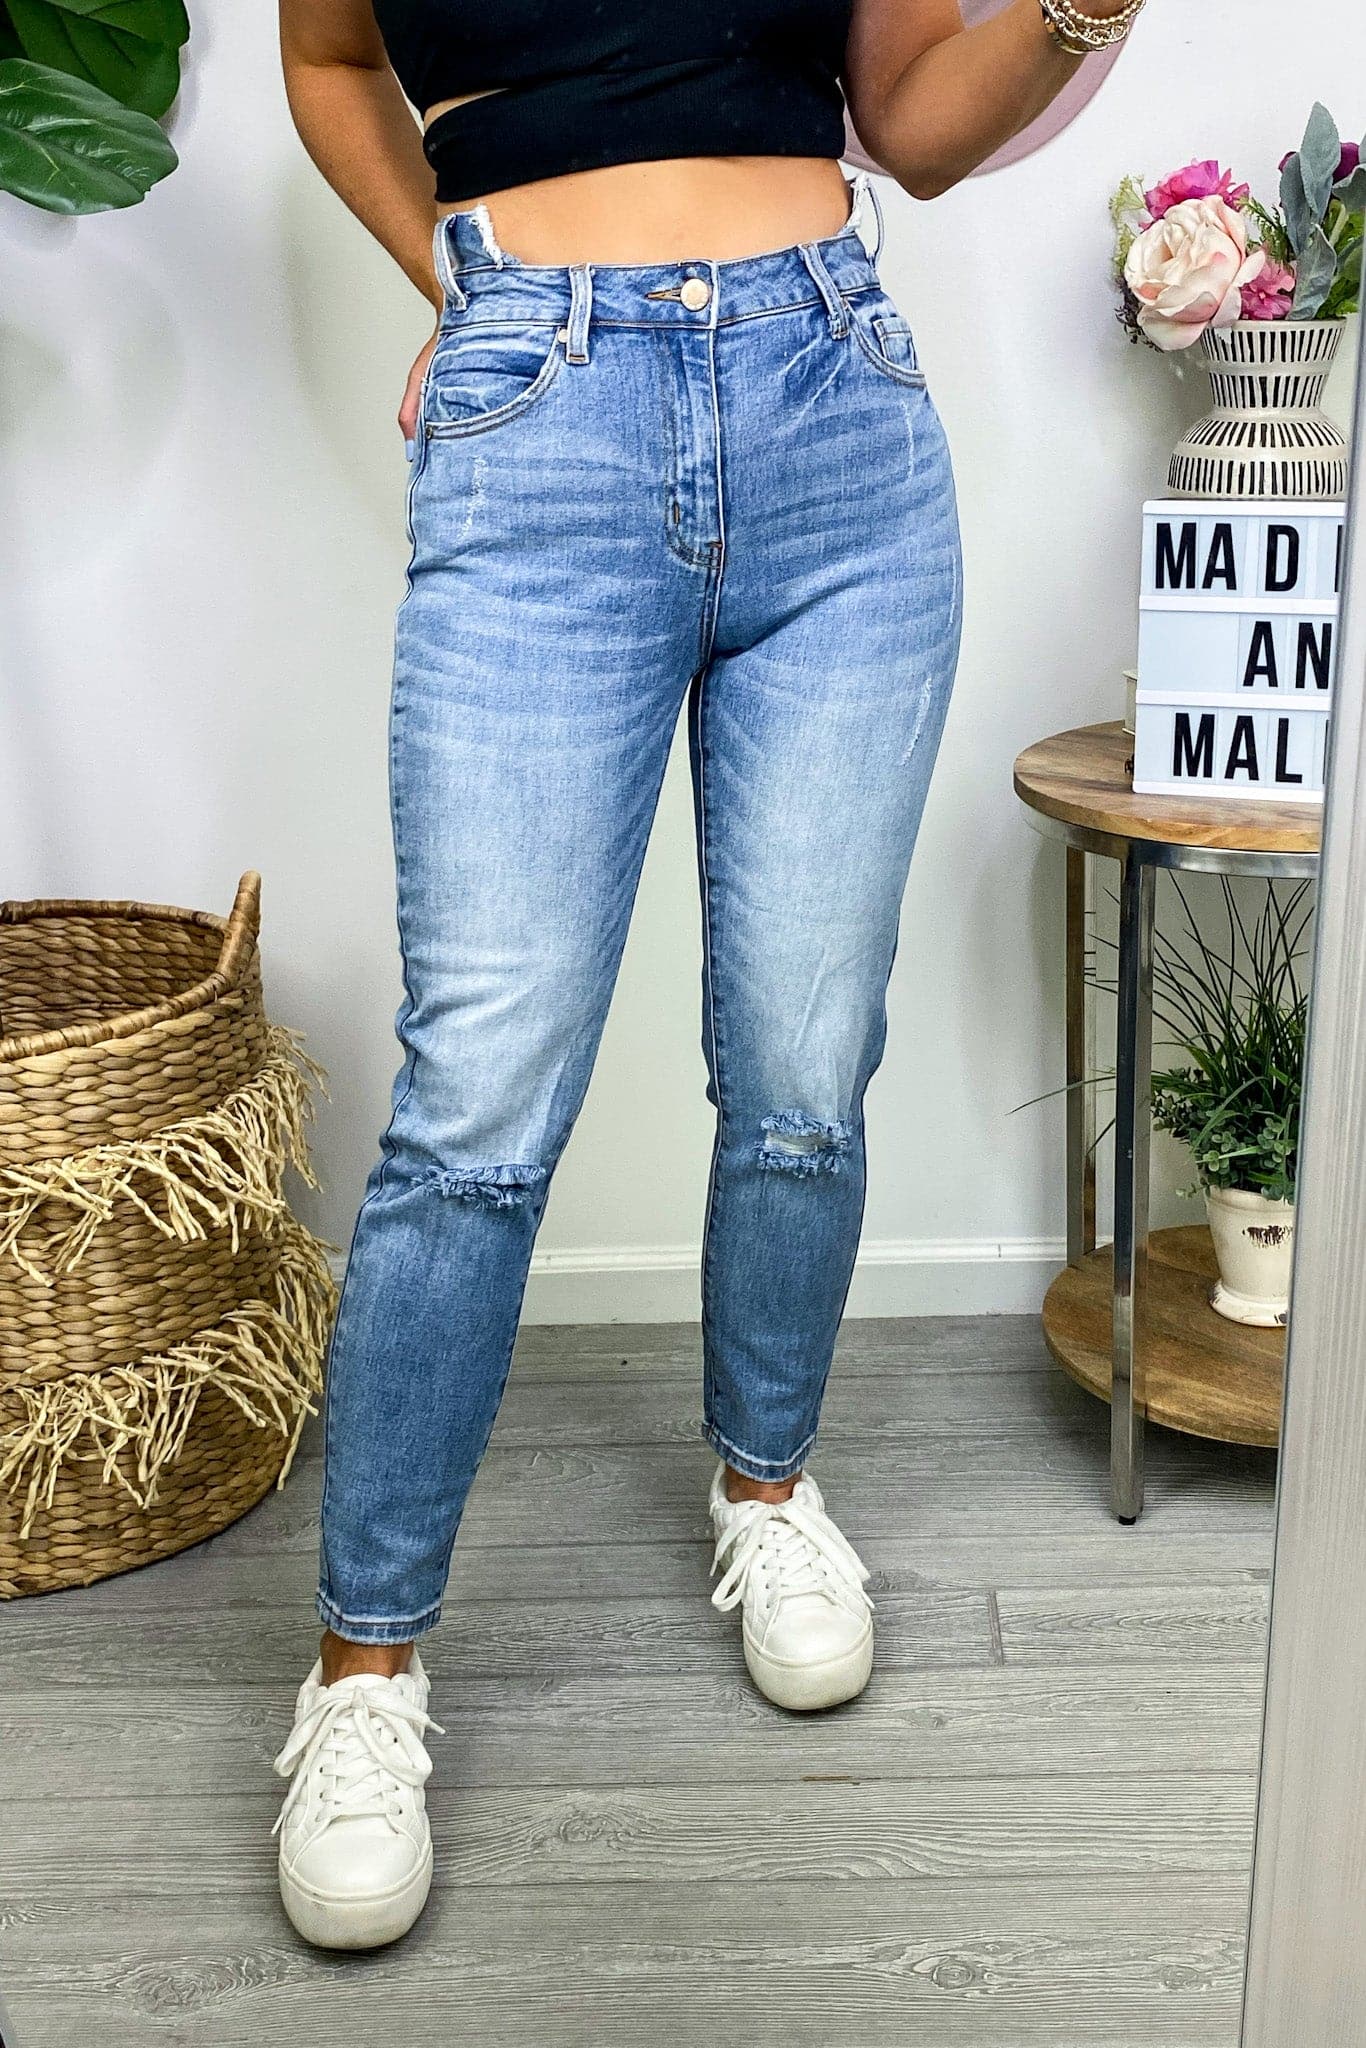  Harlee Uneven Waistband Distressed Boyfriend Jeans - FINAL SALE - Madison and Mallory